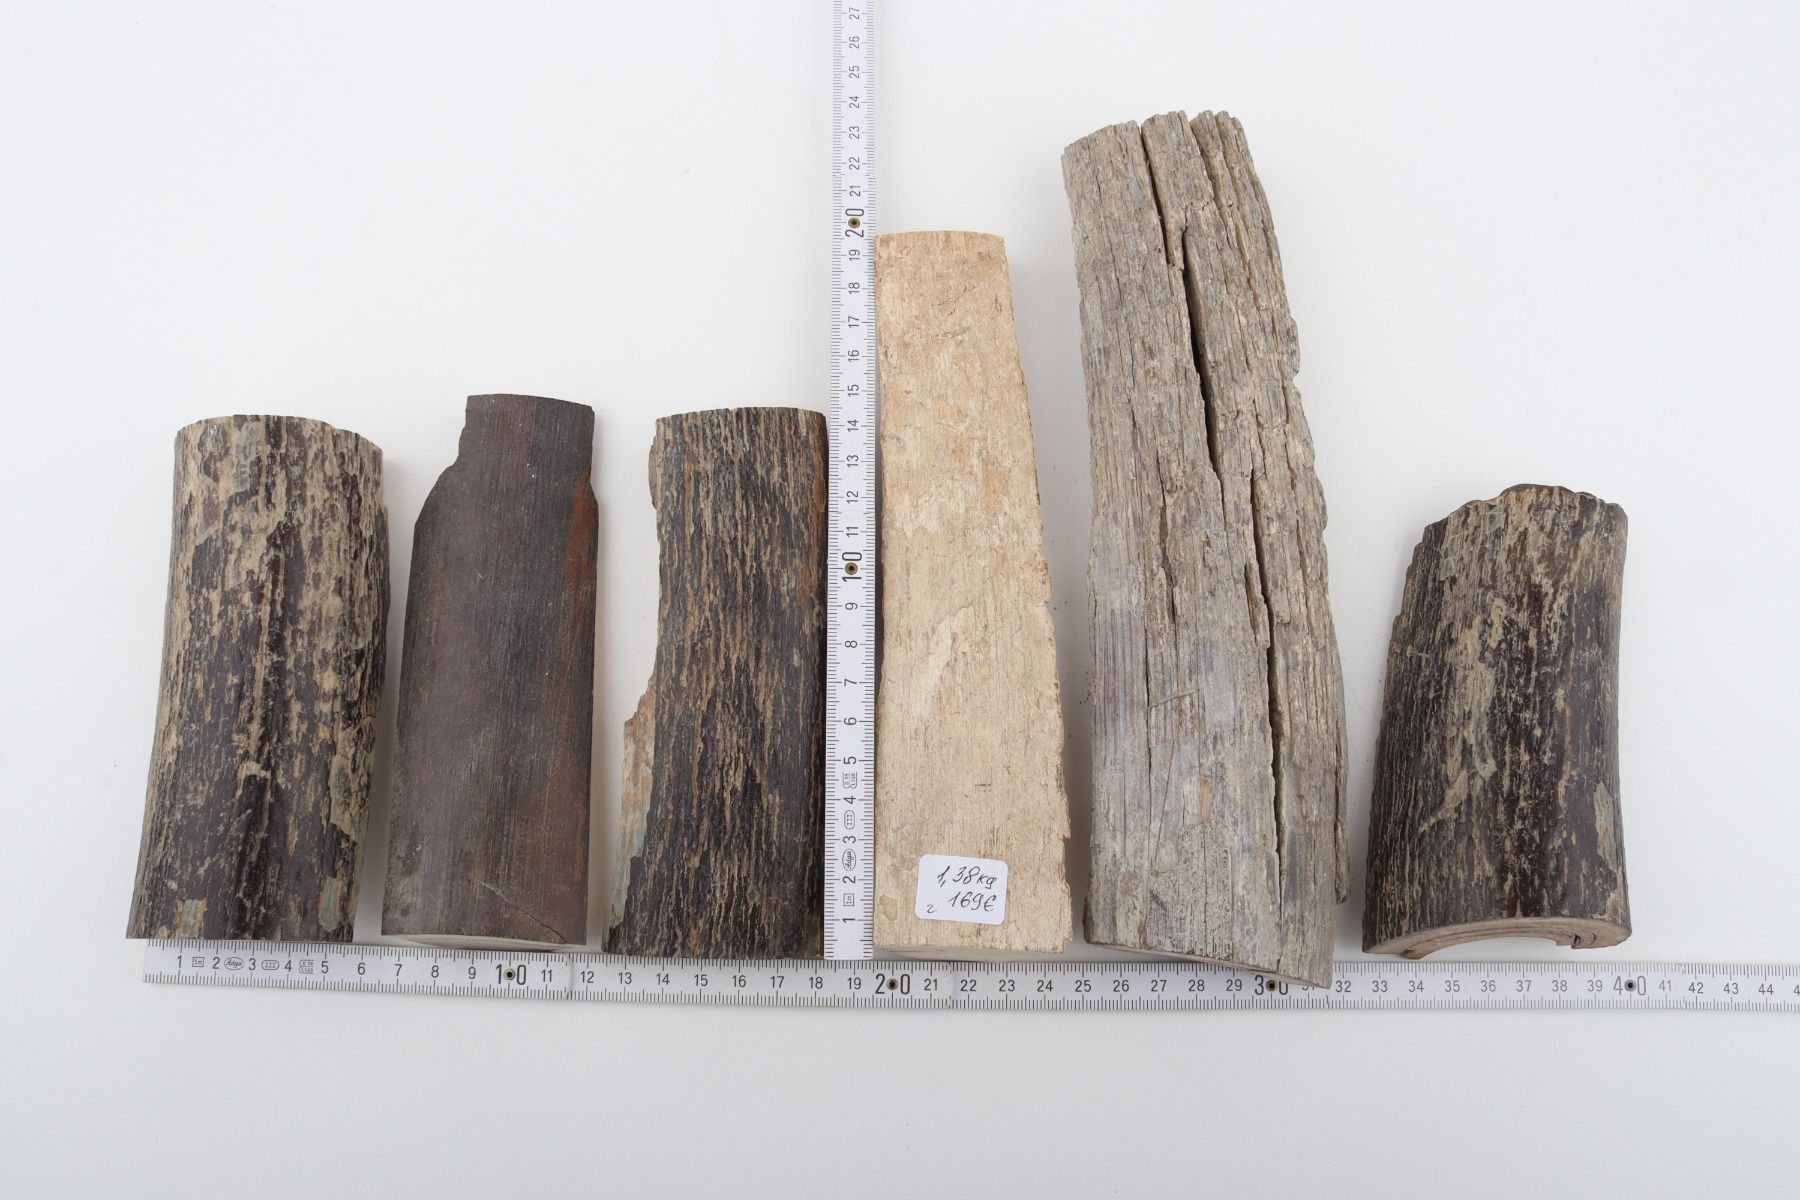 Untreated mammoth bark pieces